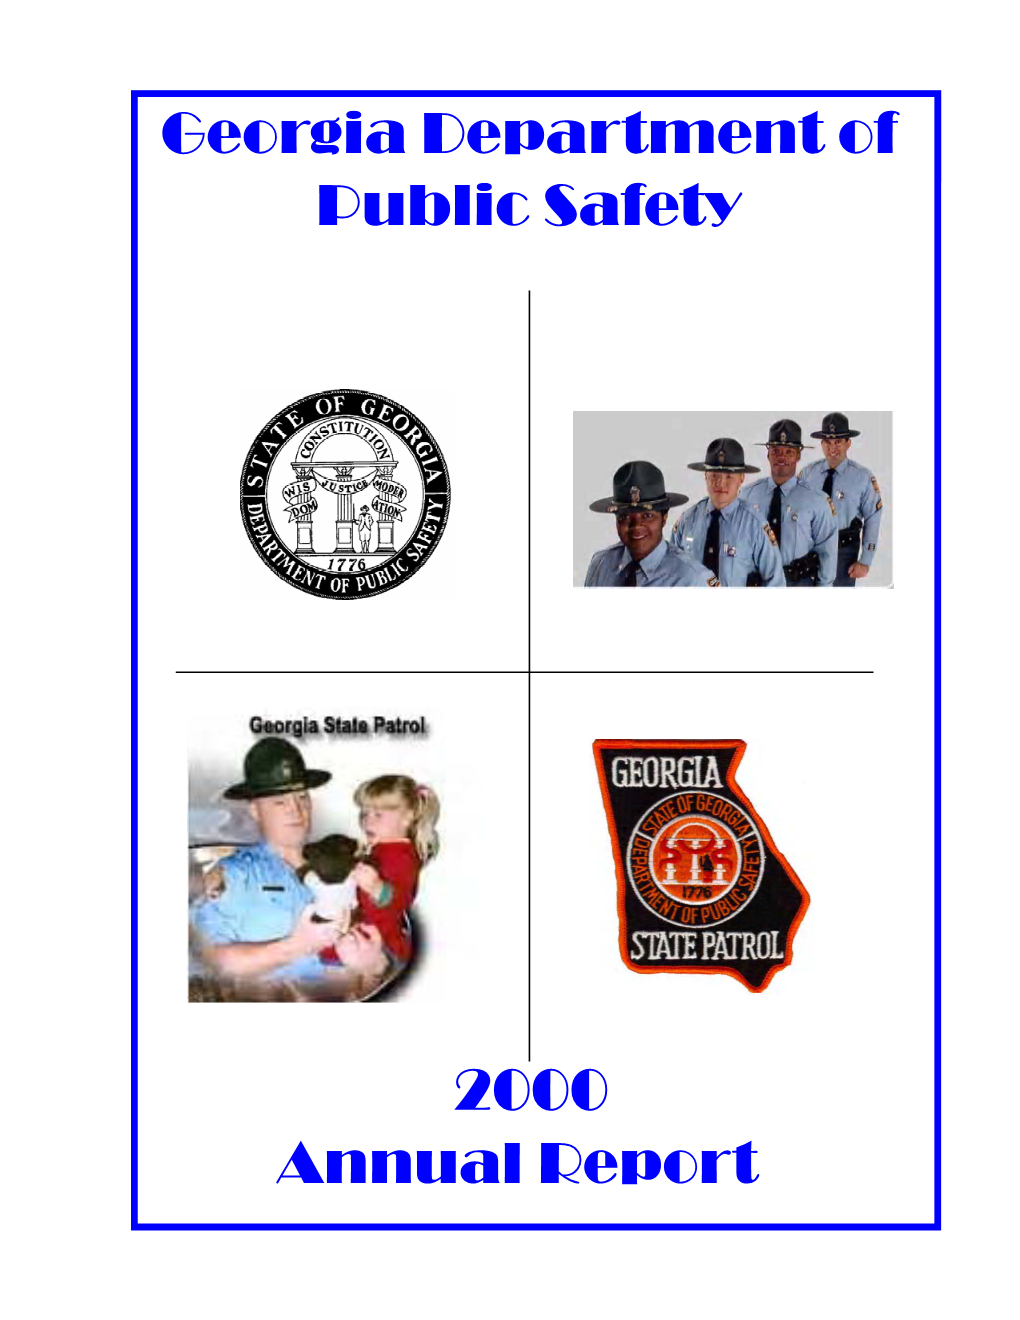 2000 Annual Report 1 Georgia Department of Public Safety